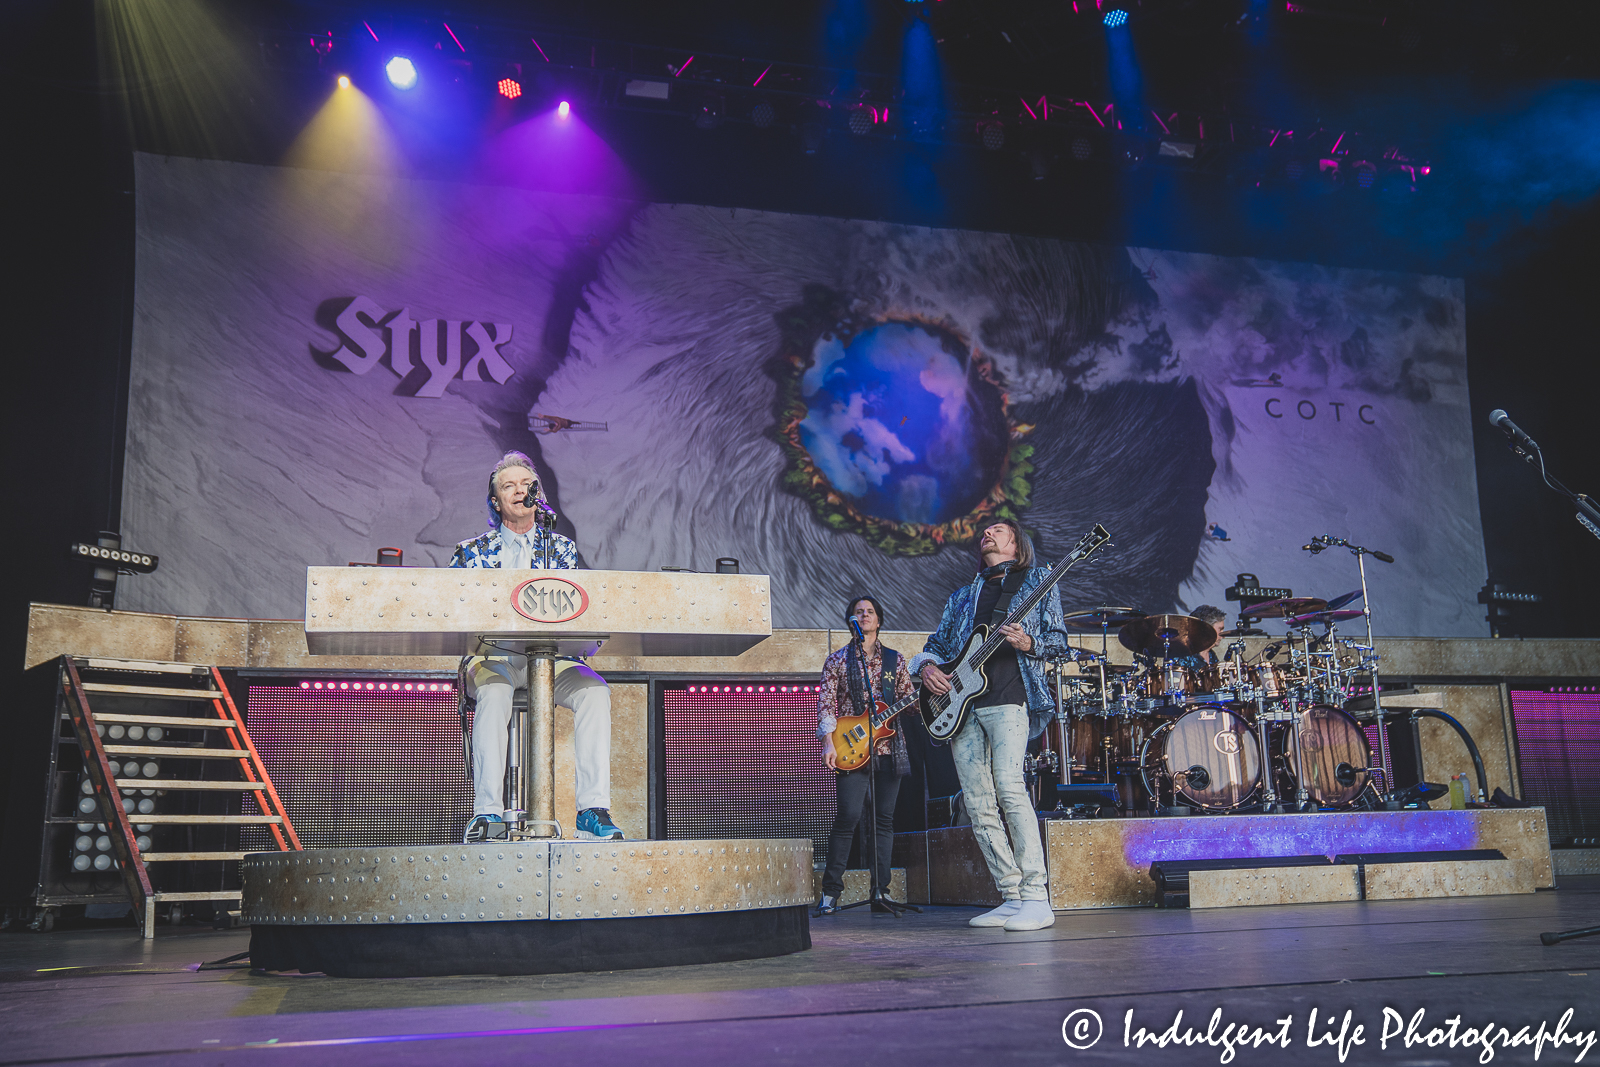 Styx band members Lawrence Gowan, Will Evankovich, Ricky Phillips and Todd Sucherman playing together at Starlight Theatre in Kansas City, June 14, 2022.